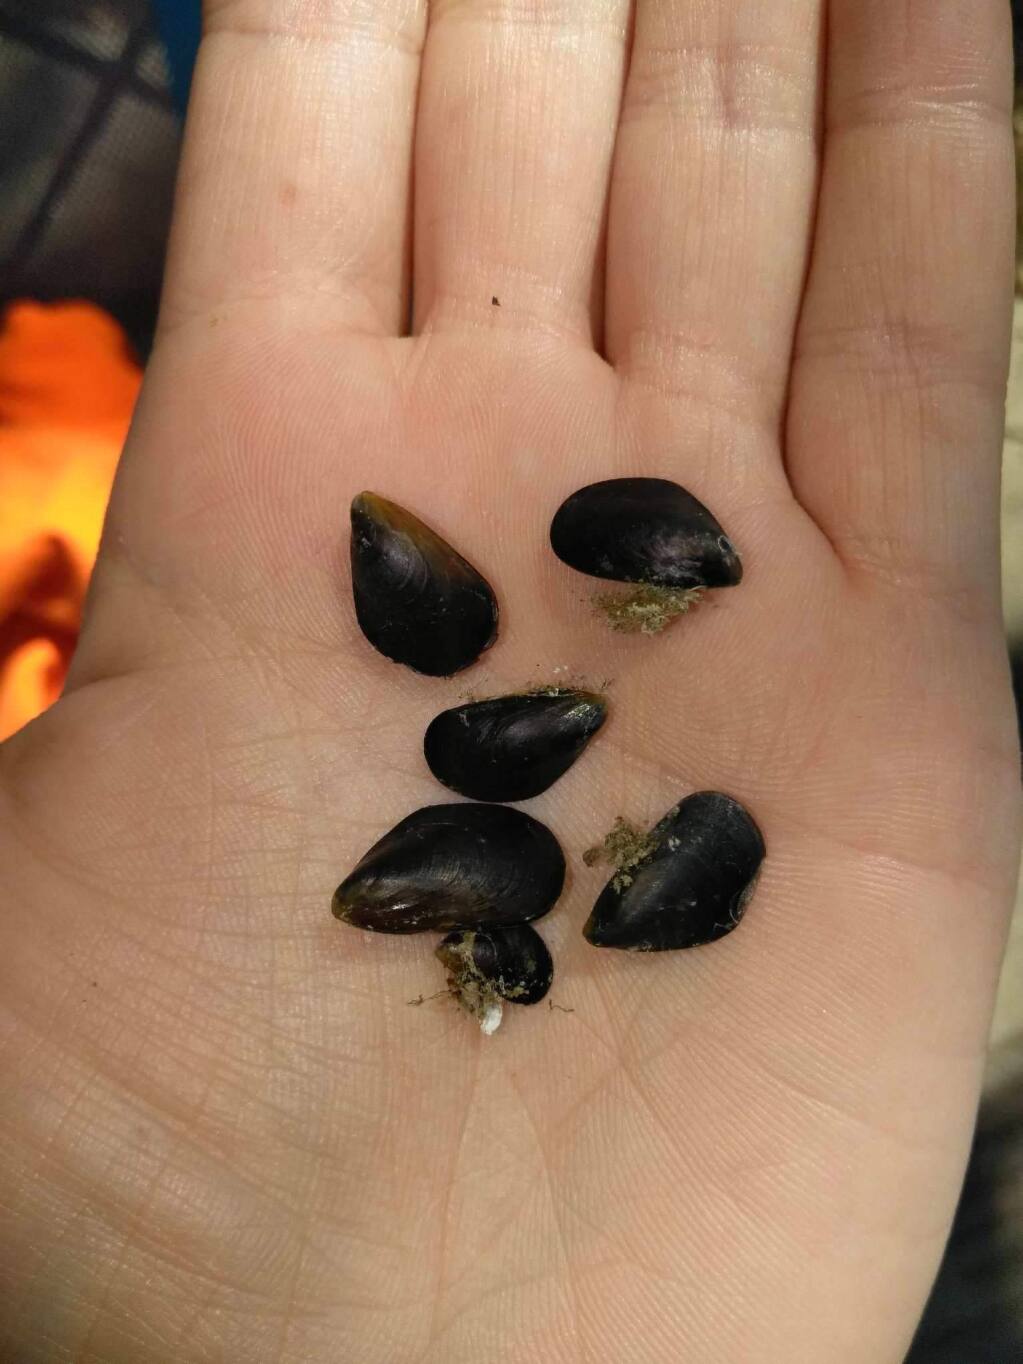 Invasive mussels found in a boat before it launched into Lake Mendocino. (Mussel Dogs)